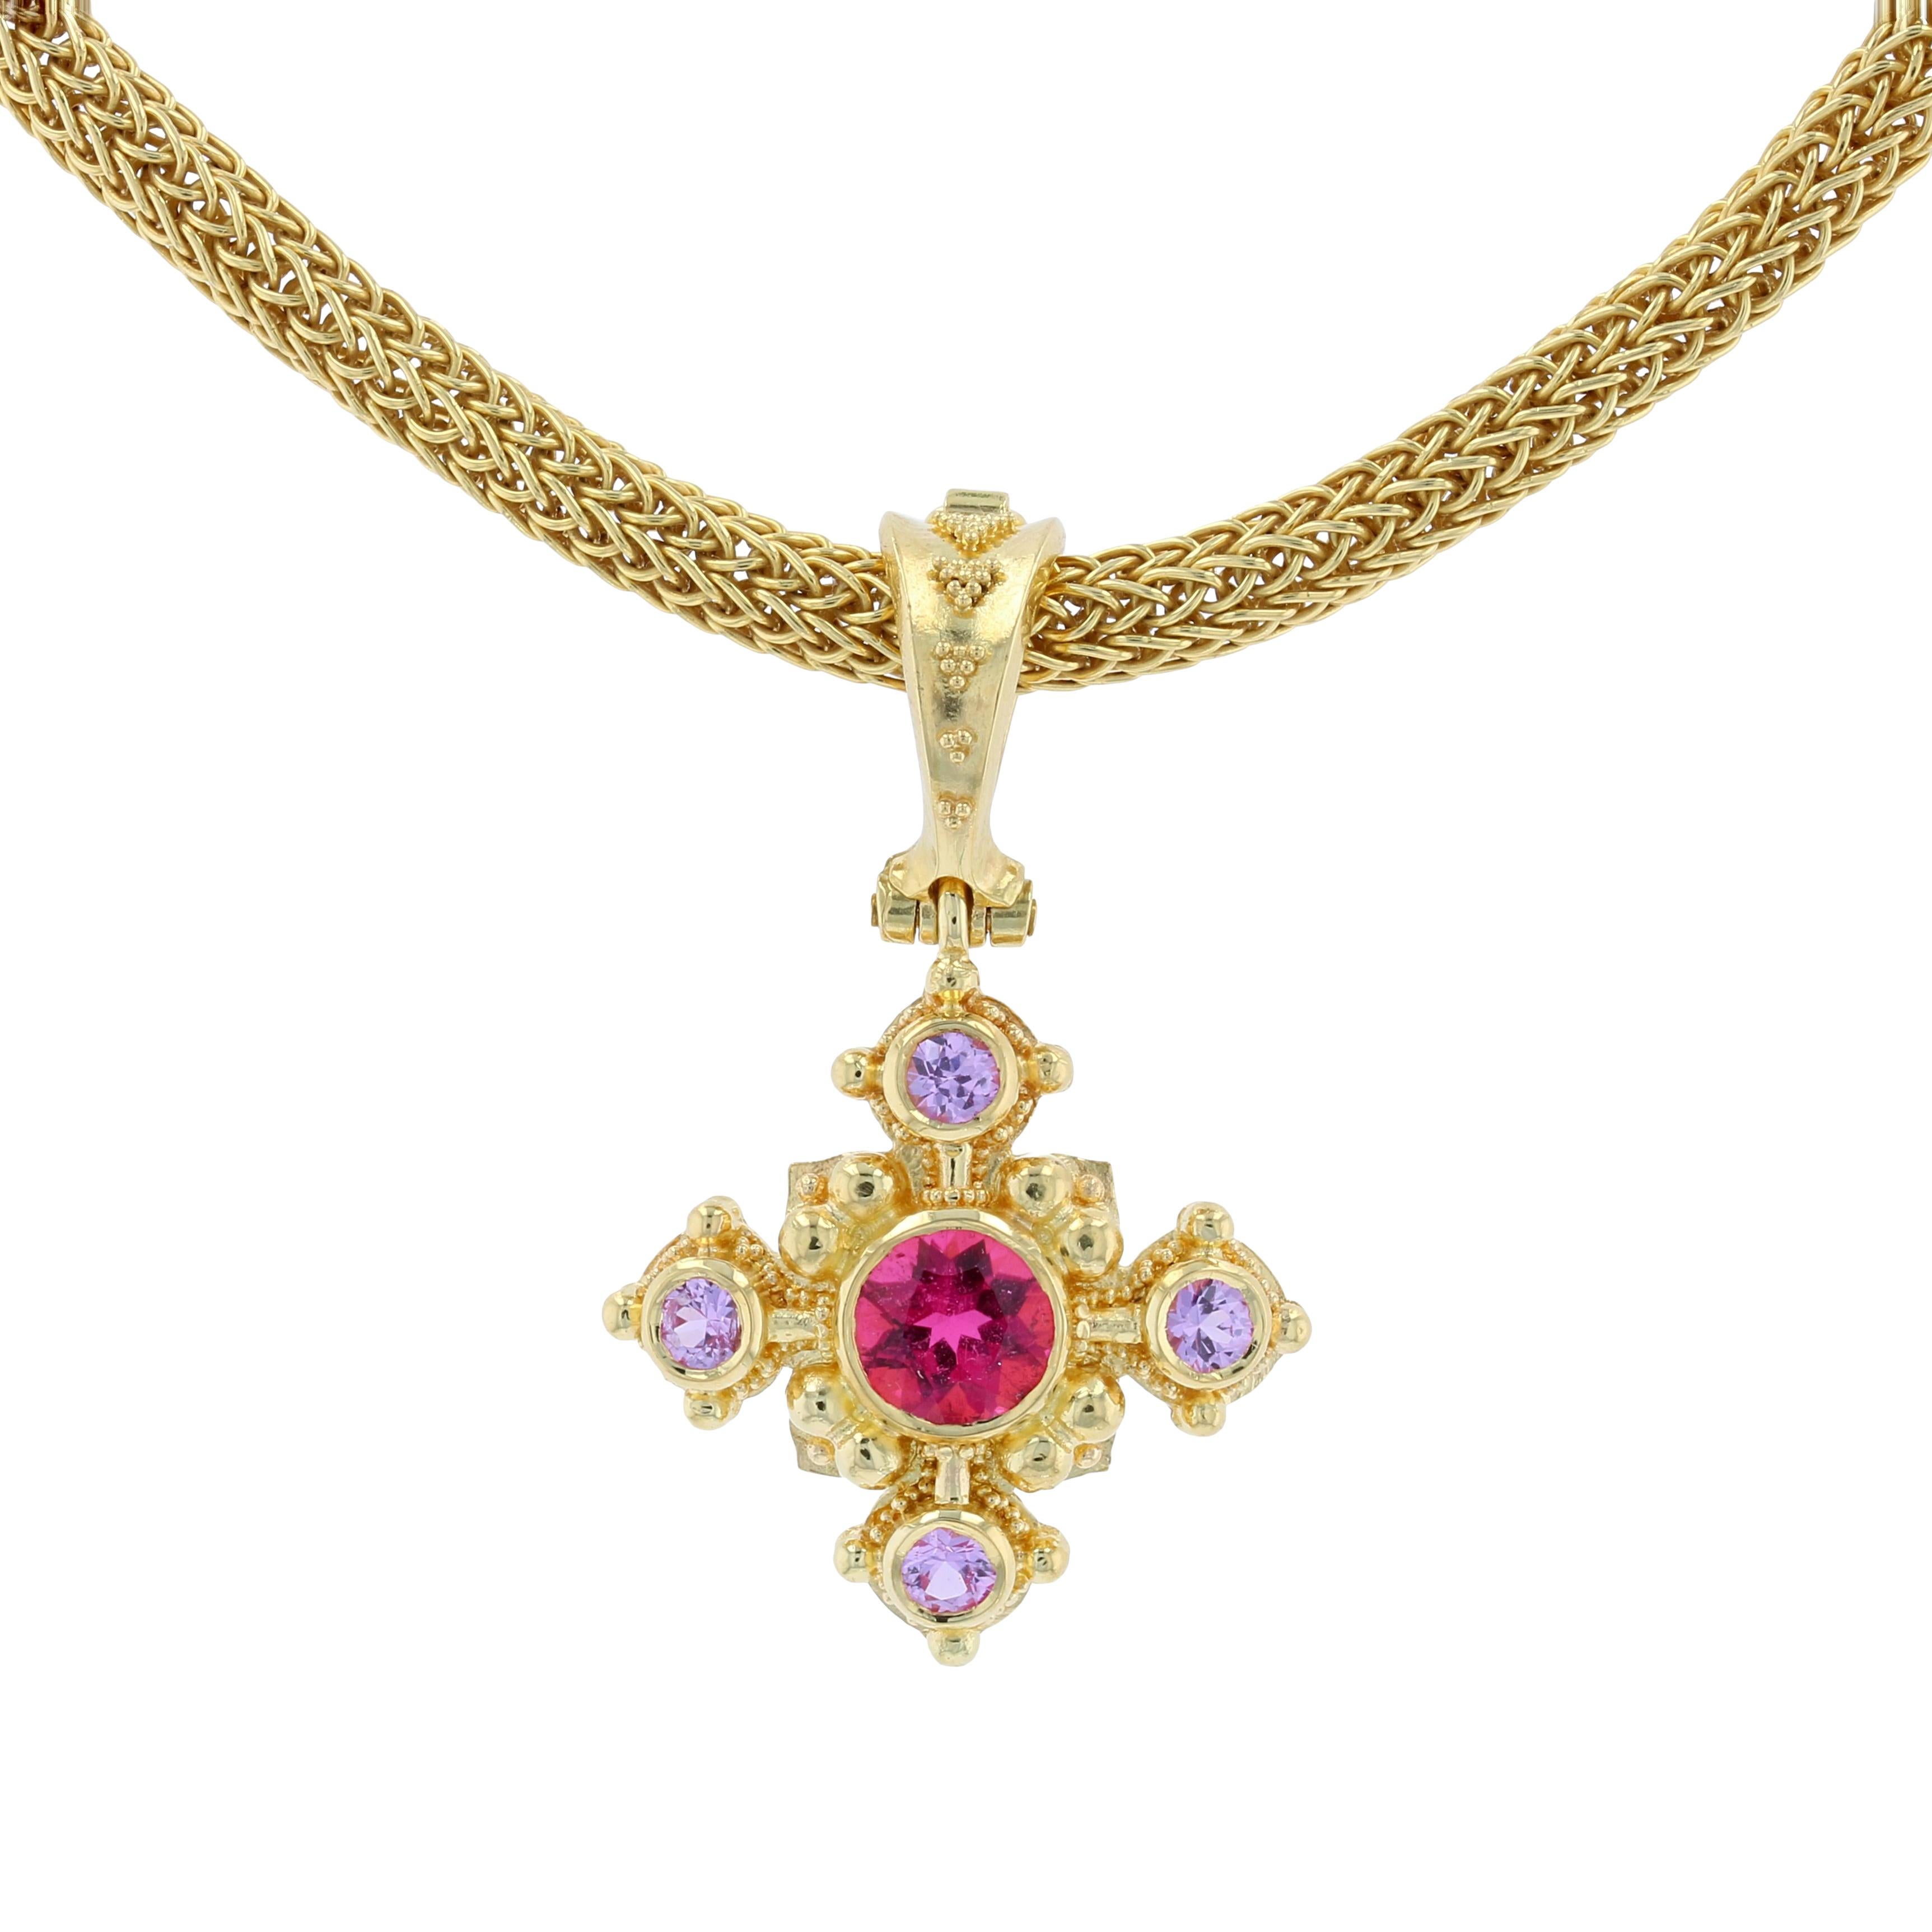 Kent Raible's regal Rubellite Tourmaline Cross Pendant Enhancer with Pink Sapphire accents comes to us from his limited edition 'Studio Collection'.
In keeping with the quote from the curator of the Smithsonian (see below) this iconic jewelry